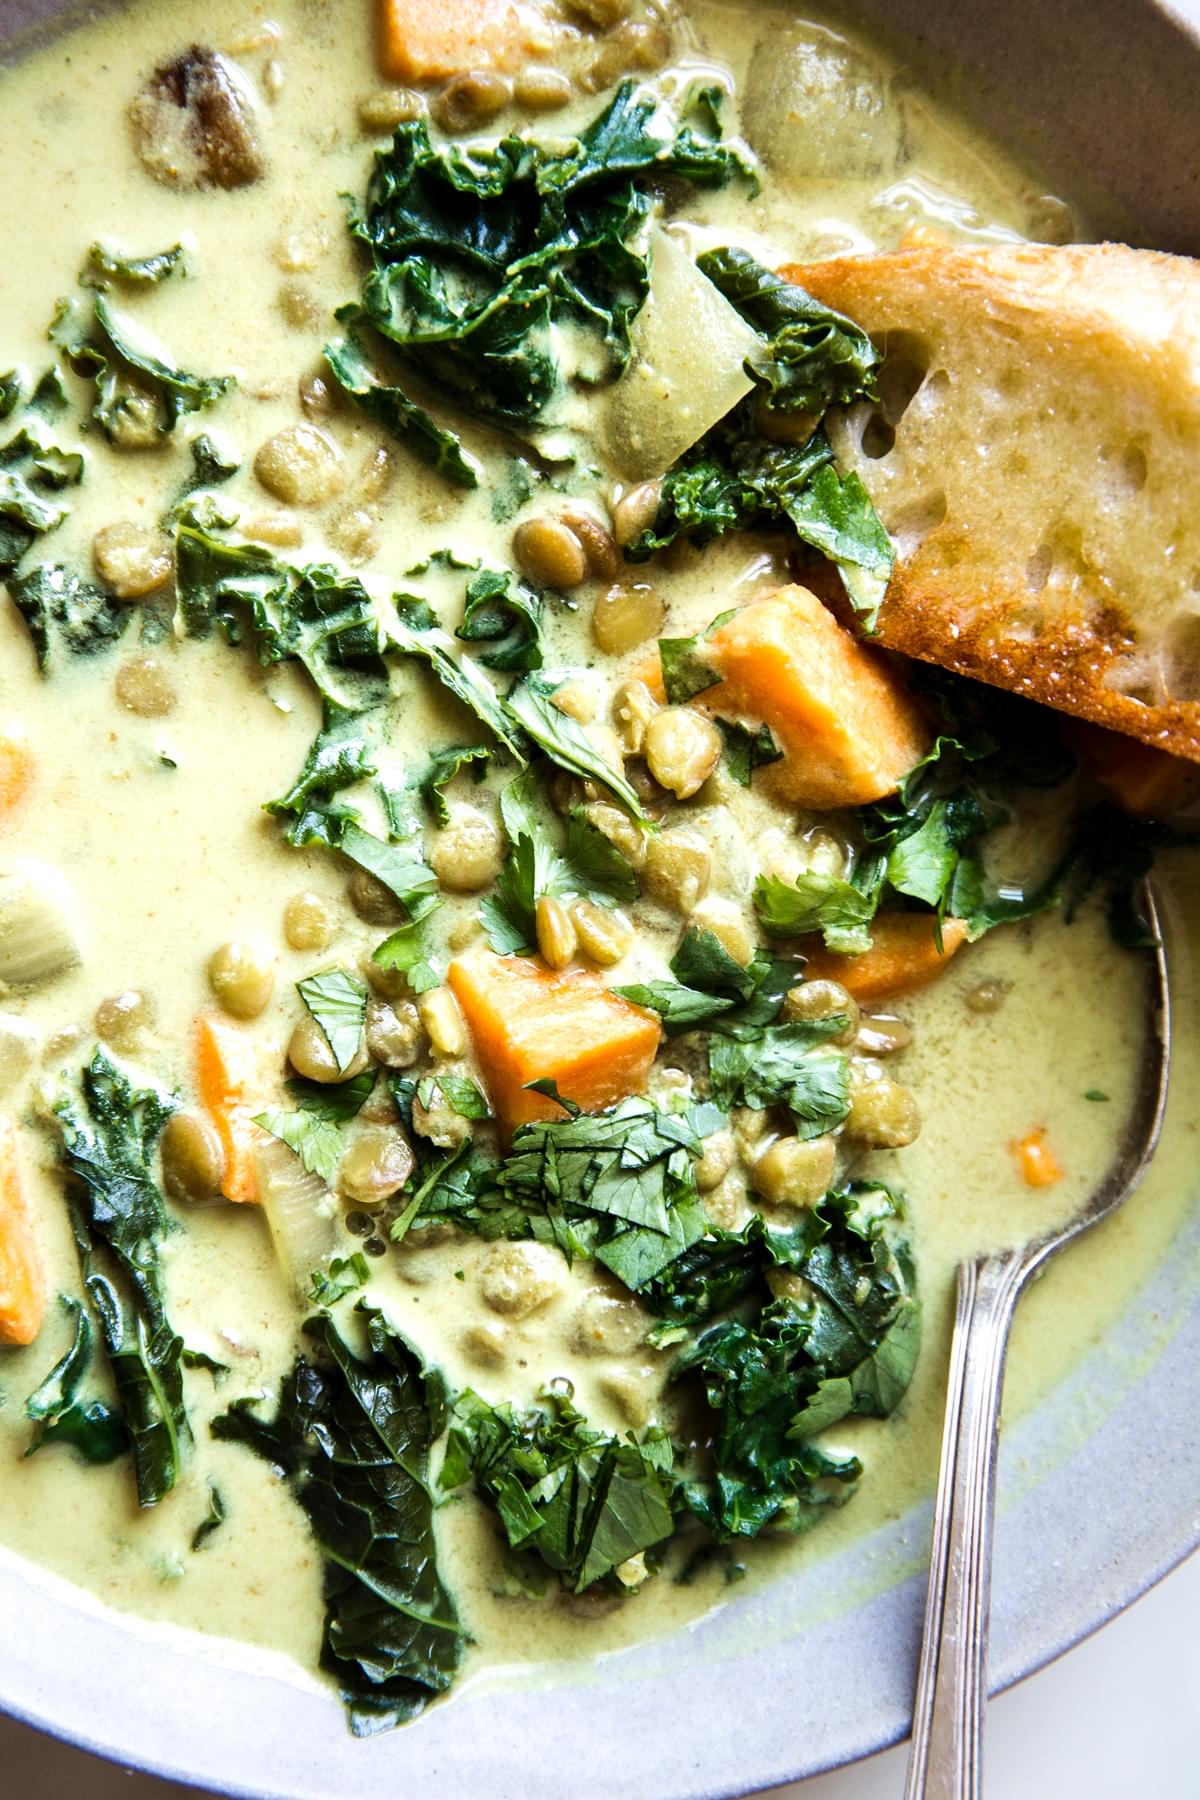 Coconut curry lentil soup with sweet potatoes a kale in a bowl